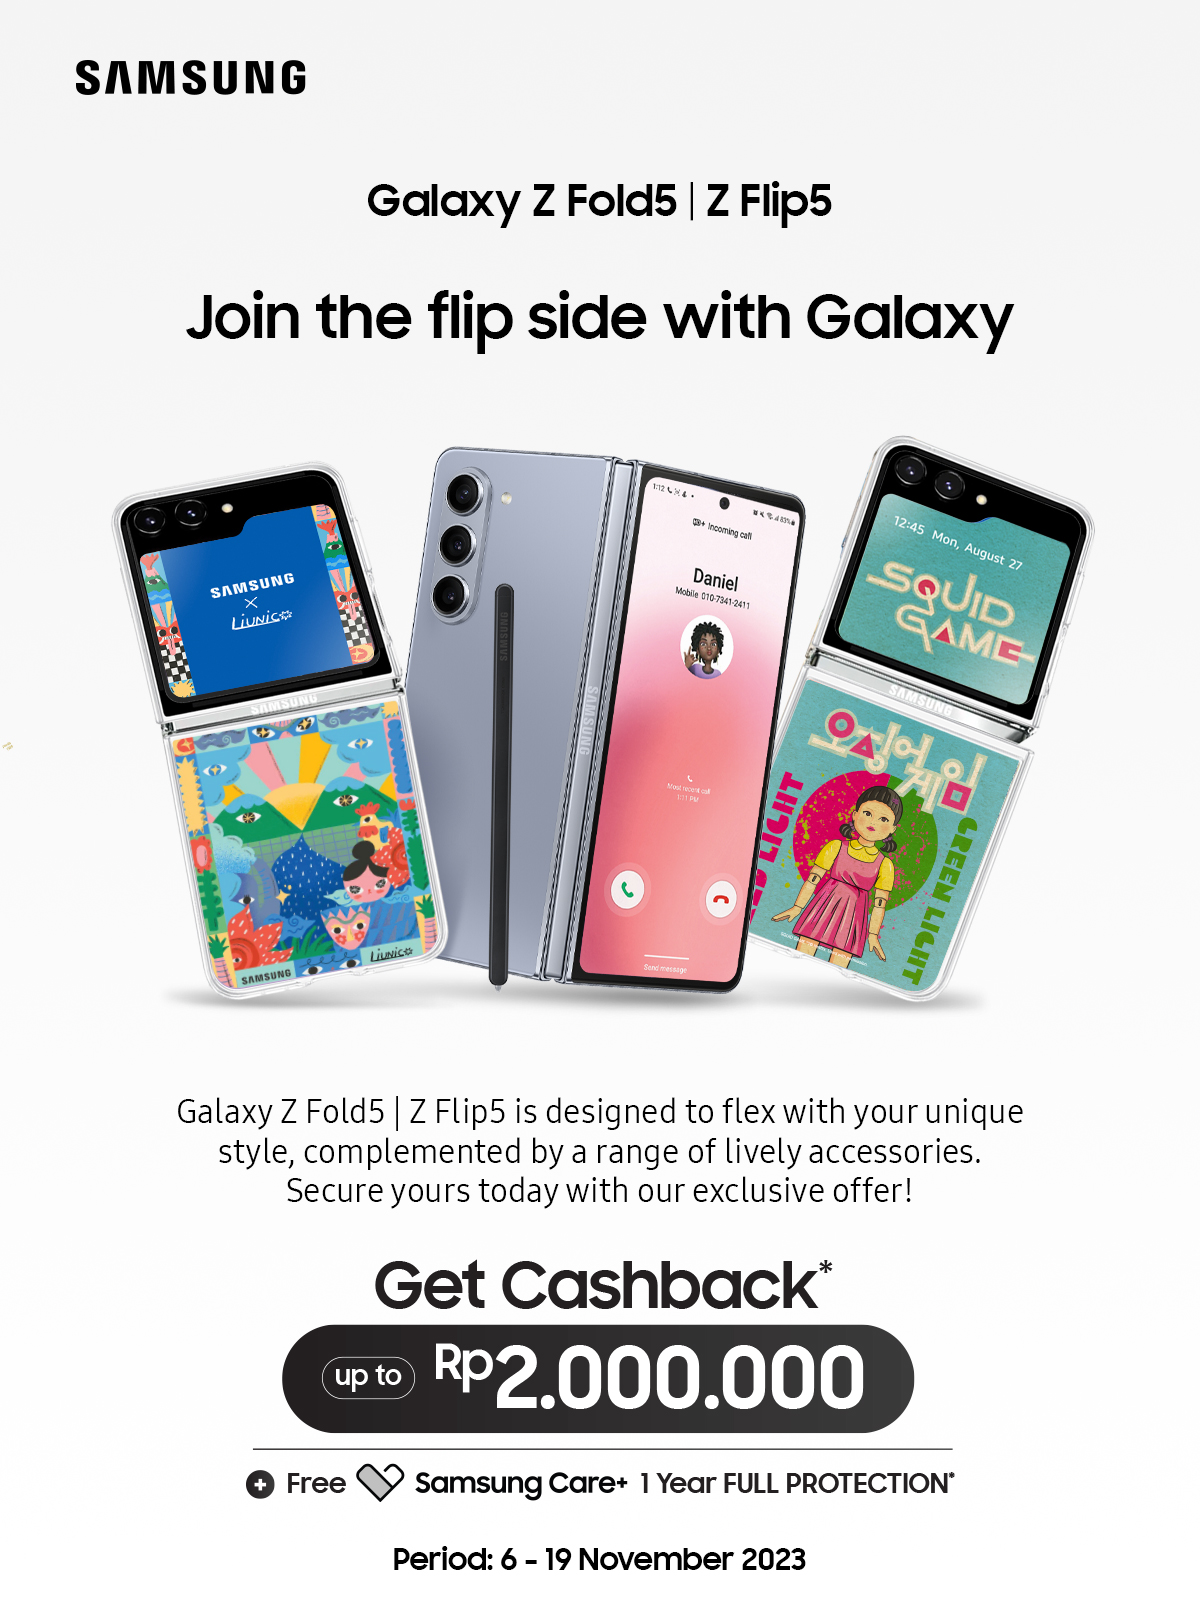 Join the flip side with Galaxy | Galaxy Z Fold5 | Z Flip5 is designed to flex with your unique style, complemented by a range of lively accessories. Secure yours today with our exclusive offer!